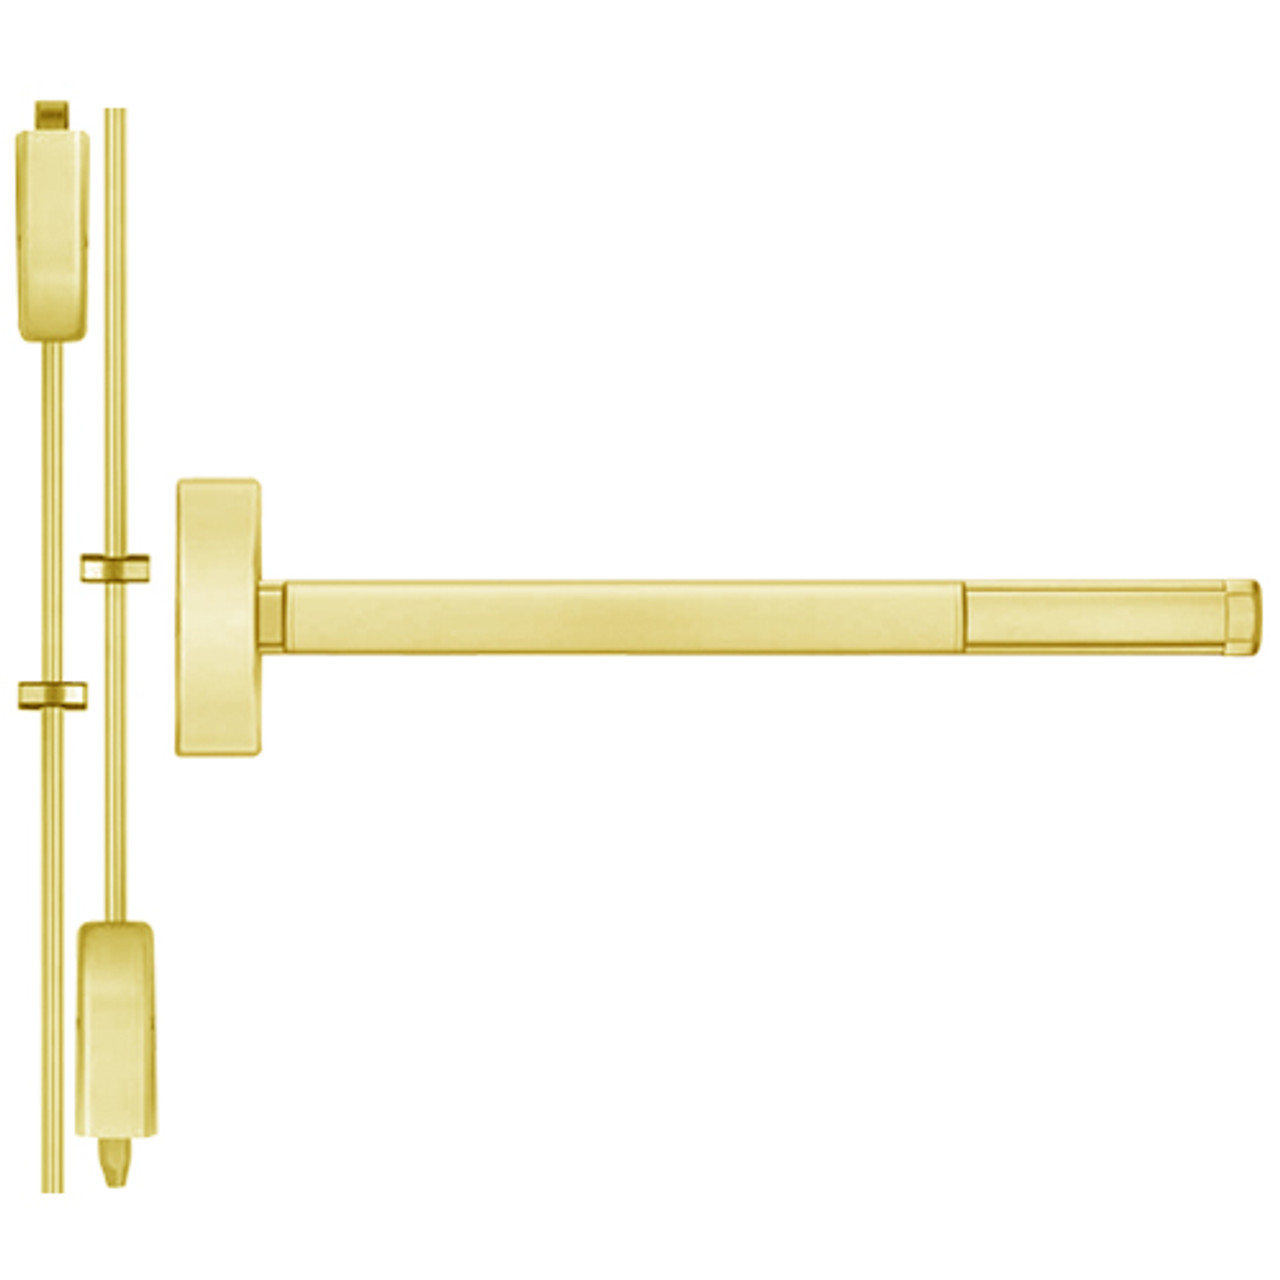 2208-605-48 PHI 2200 Series Non Fire Rated Apex Surface Vertical Rod Exit Device Prepped for Key Controls Lever/Knob in Bright Brass Finish